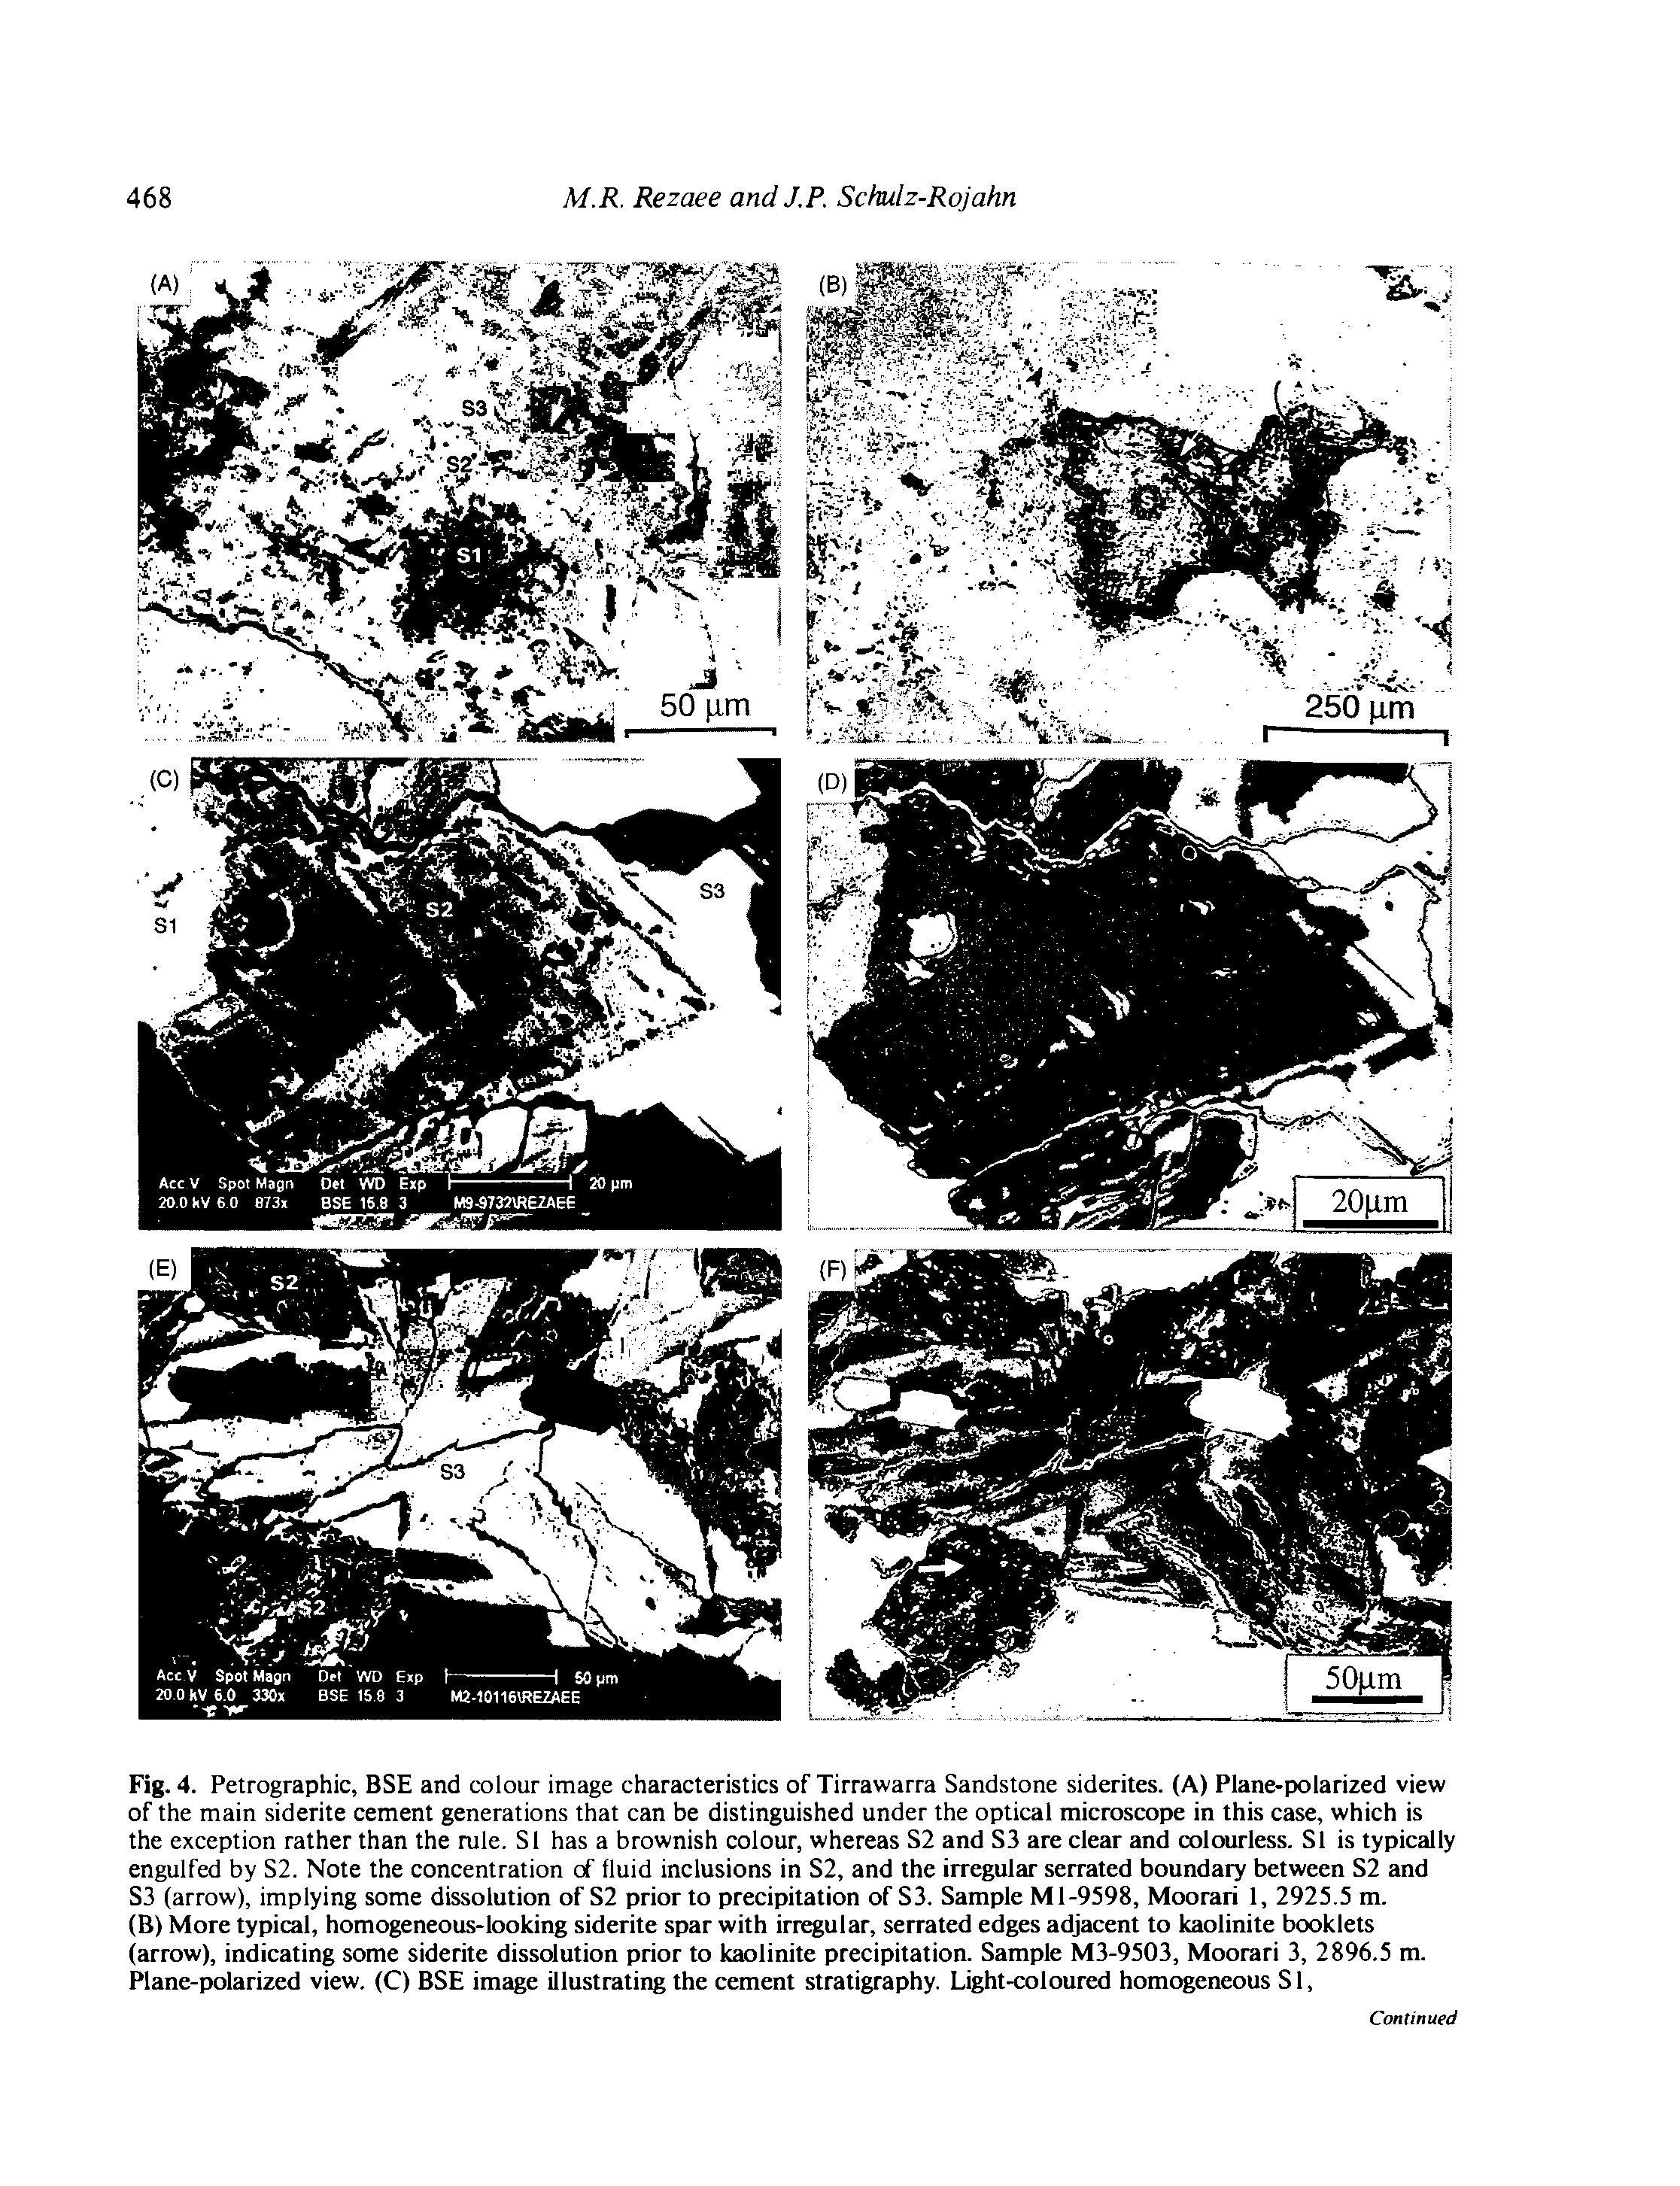 Fig. 4. Petrographic, BSE and colour image characteristics of Tirrawarra Sandstone siderites. (A) Plane-polarized view of the main siderite cement generations that can be distinguished under the optical microscope in this case, which is the exception rather than the rule. SI has a brownish colour, whereas S2 and S3 are clear and colourless. SI is typically engulfed by S2. Note the concentration of fluid inclusions in S2, and the irregular serrated boundary between S2 and S3 (arrow), implying some dissolution of S2 prior to precipitation of S3. Sample Ml-9598, Moorari 1, 2925.5 m.